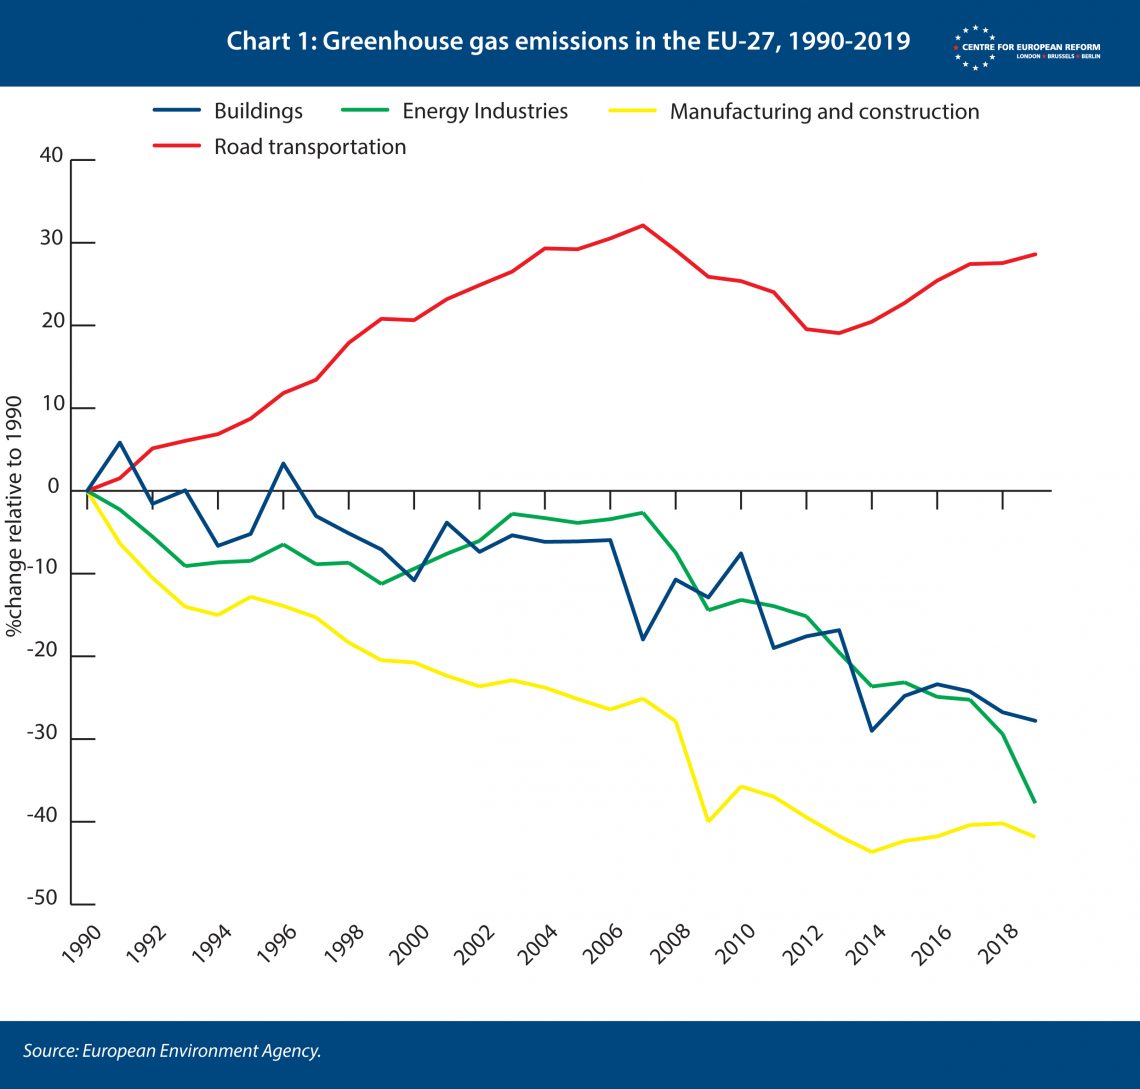 Greenhouse gas emissions in the EU 1990-2019 